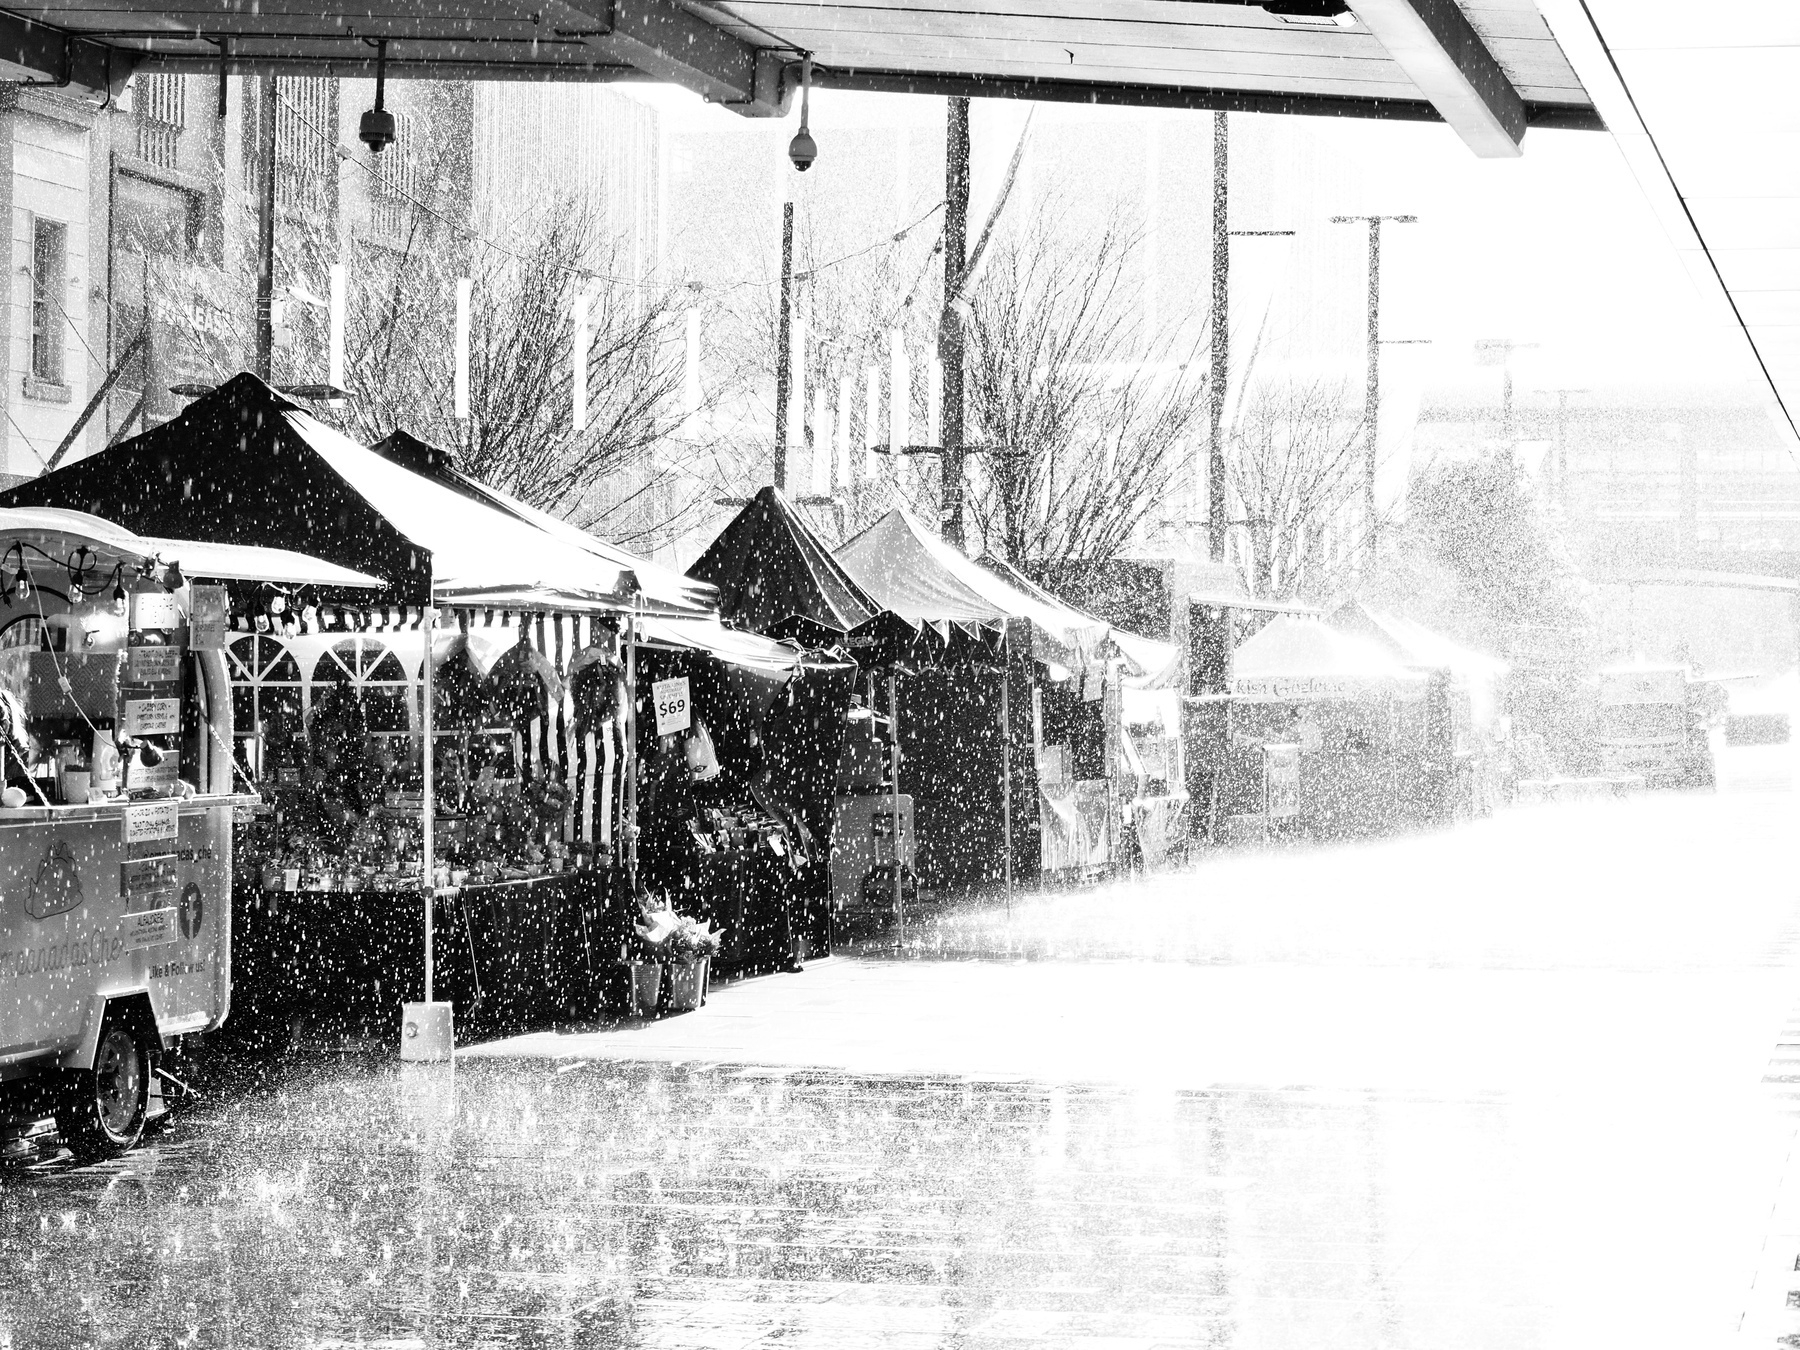 A row of market stalls in overexposed rain, with a walking bridge overhead